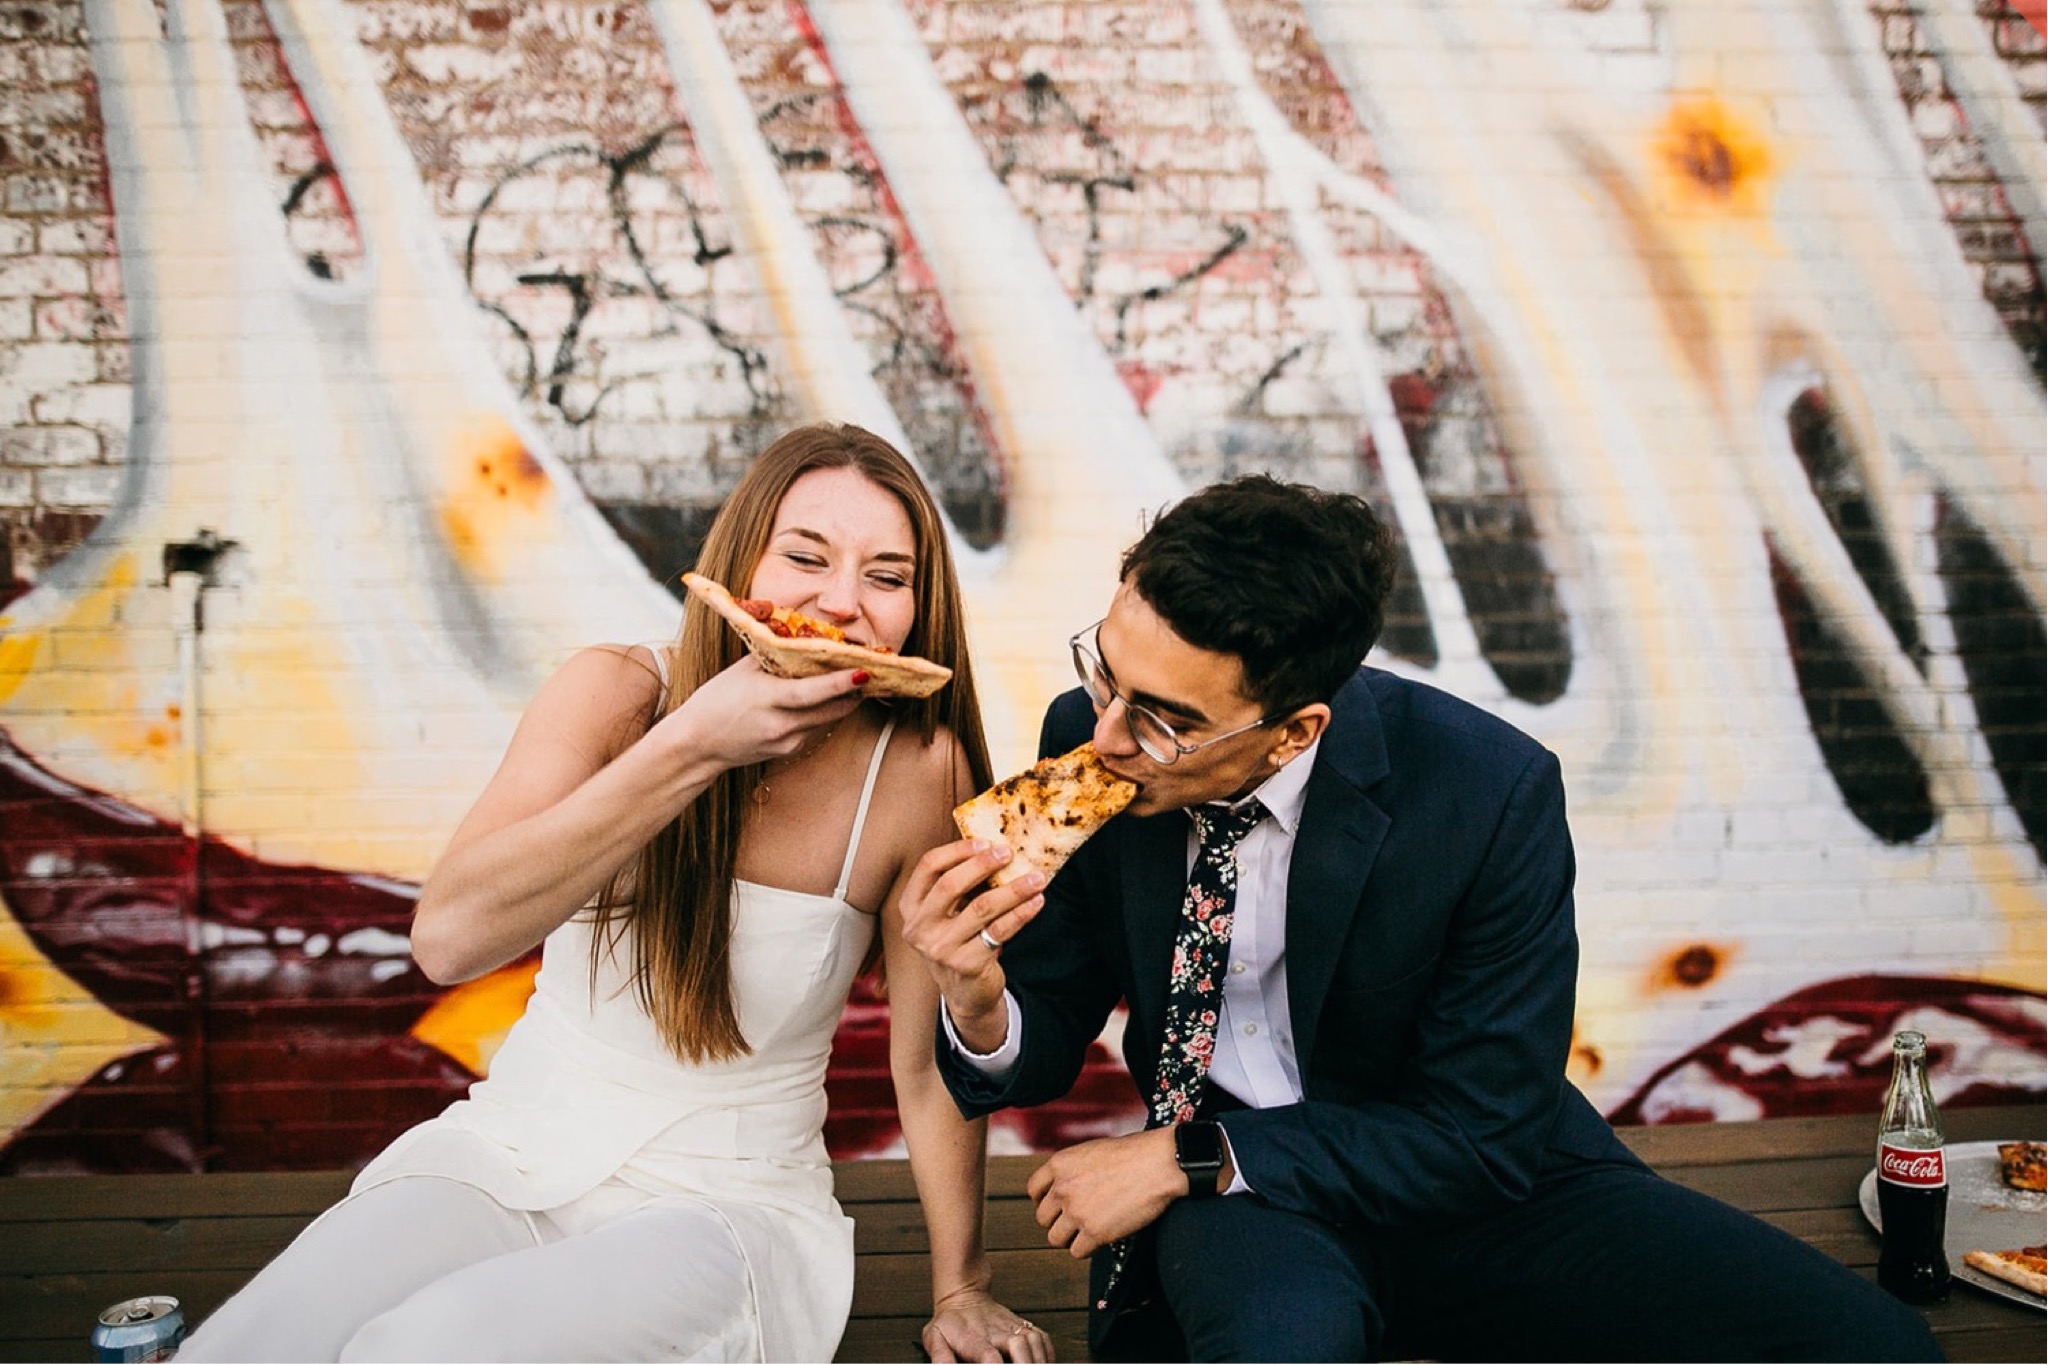 Man and woman share pizza in front of a massive pizza mural.